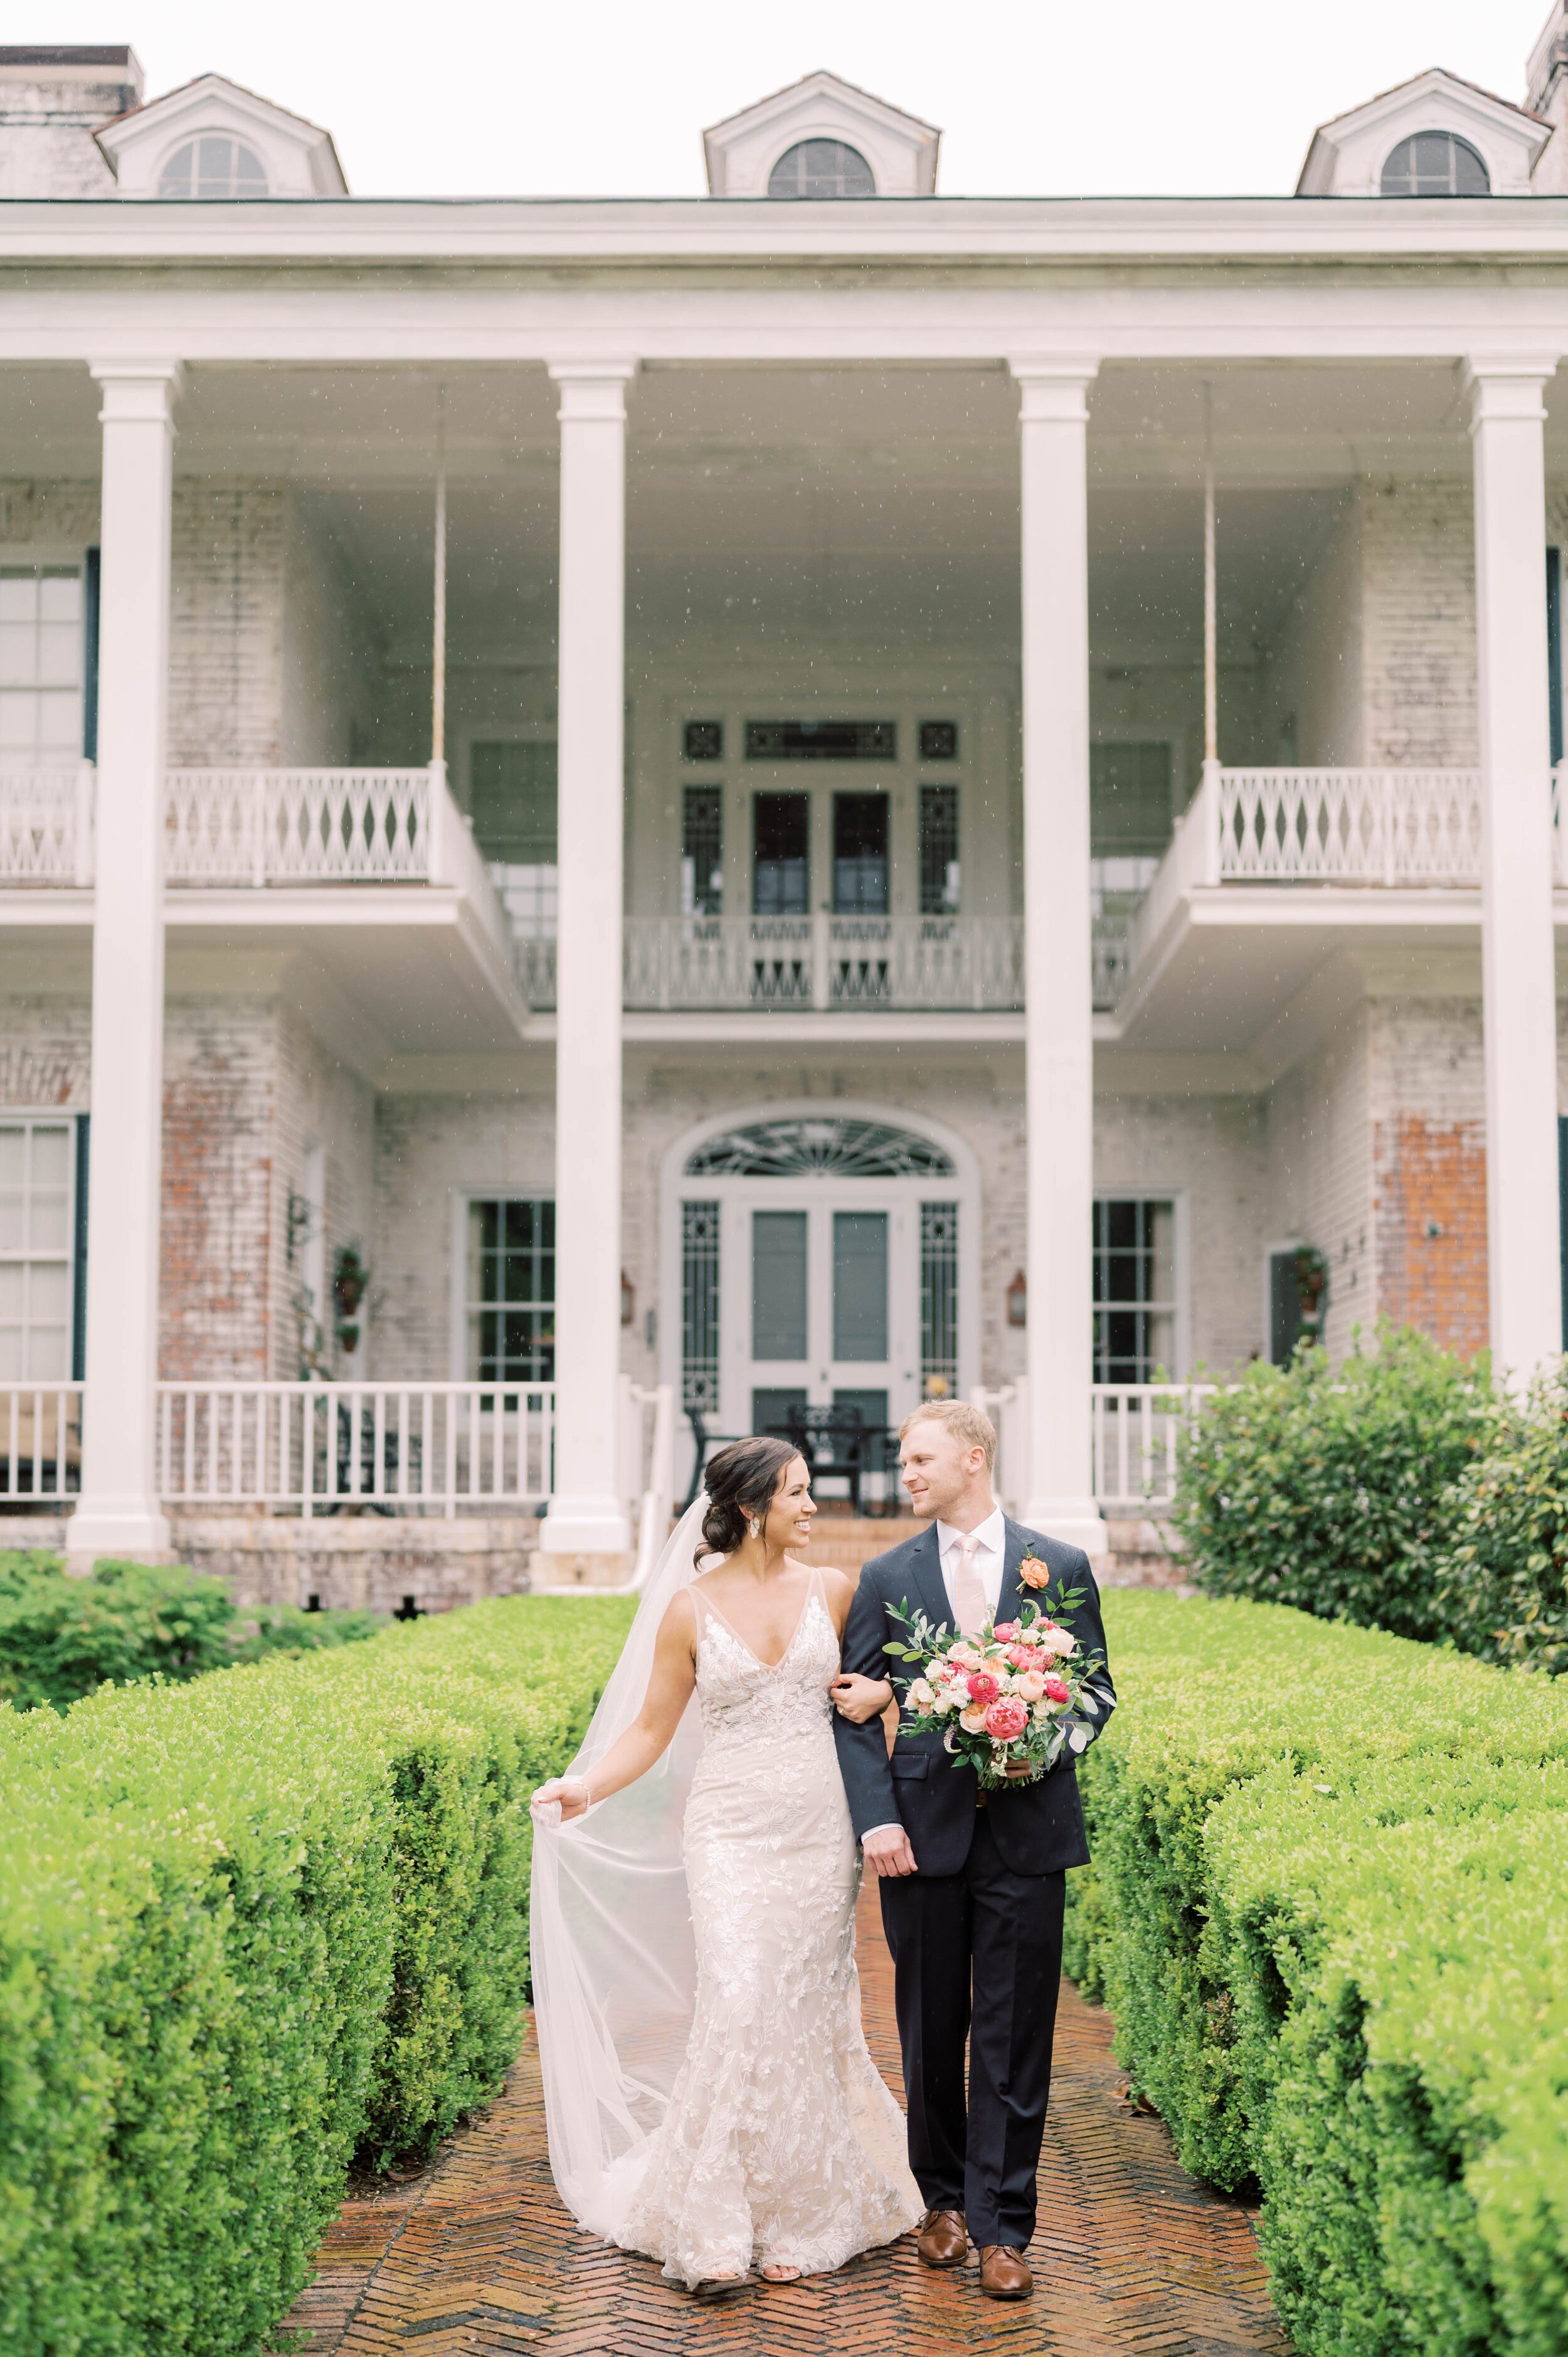 ivory-and-beau-blog-wedding-blog-ivory-and-beau-bride-madison-down-for-the-gown-made-with-love-wedding-dress-bridal-gown-wedding-gown-real-bride-real-wedding-bridal-shop-savannah-georgia-21Madison.Blake-276.jpg